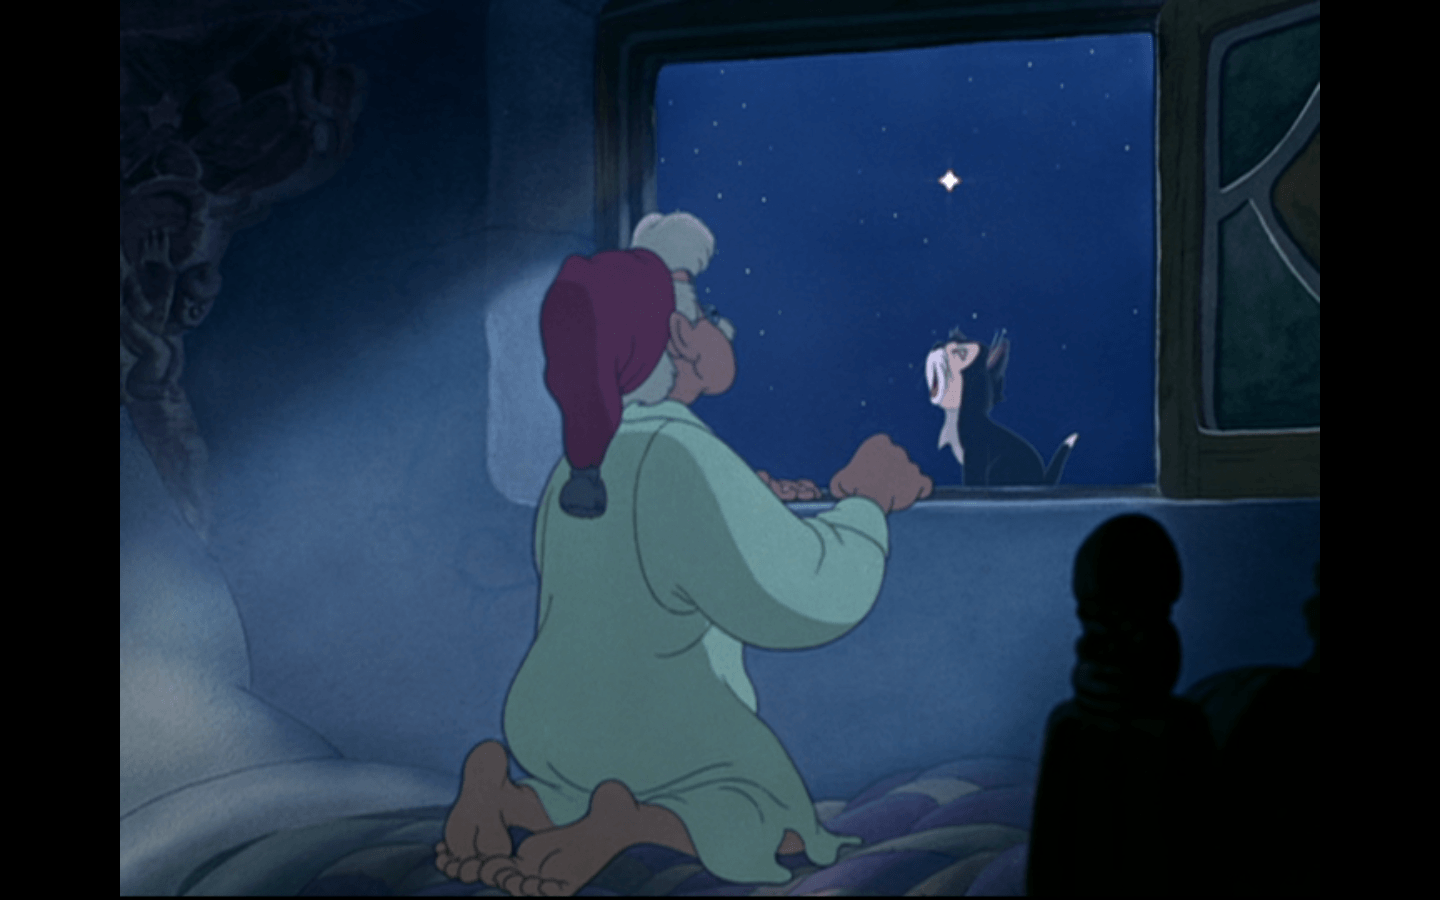 Pic of the Day: ♫ “When you wish upon a star / Makes no difference